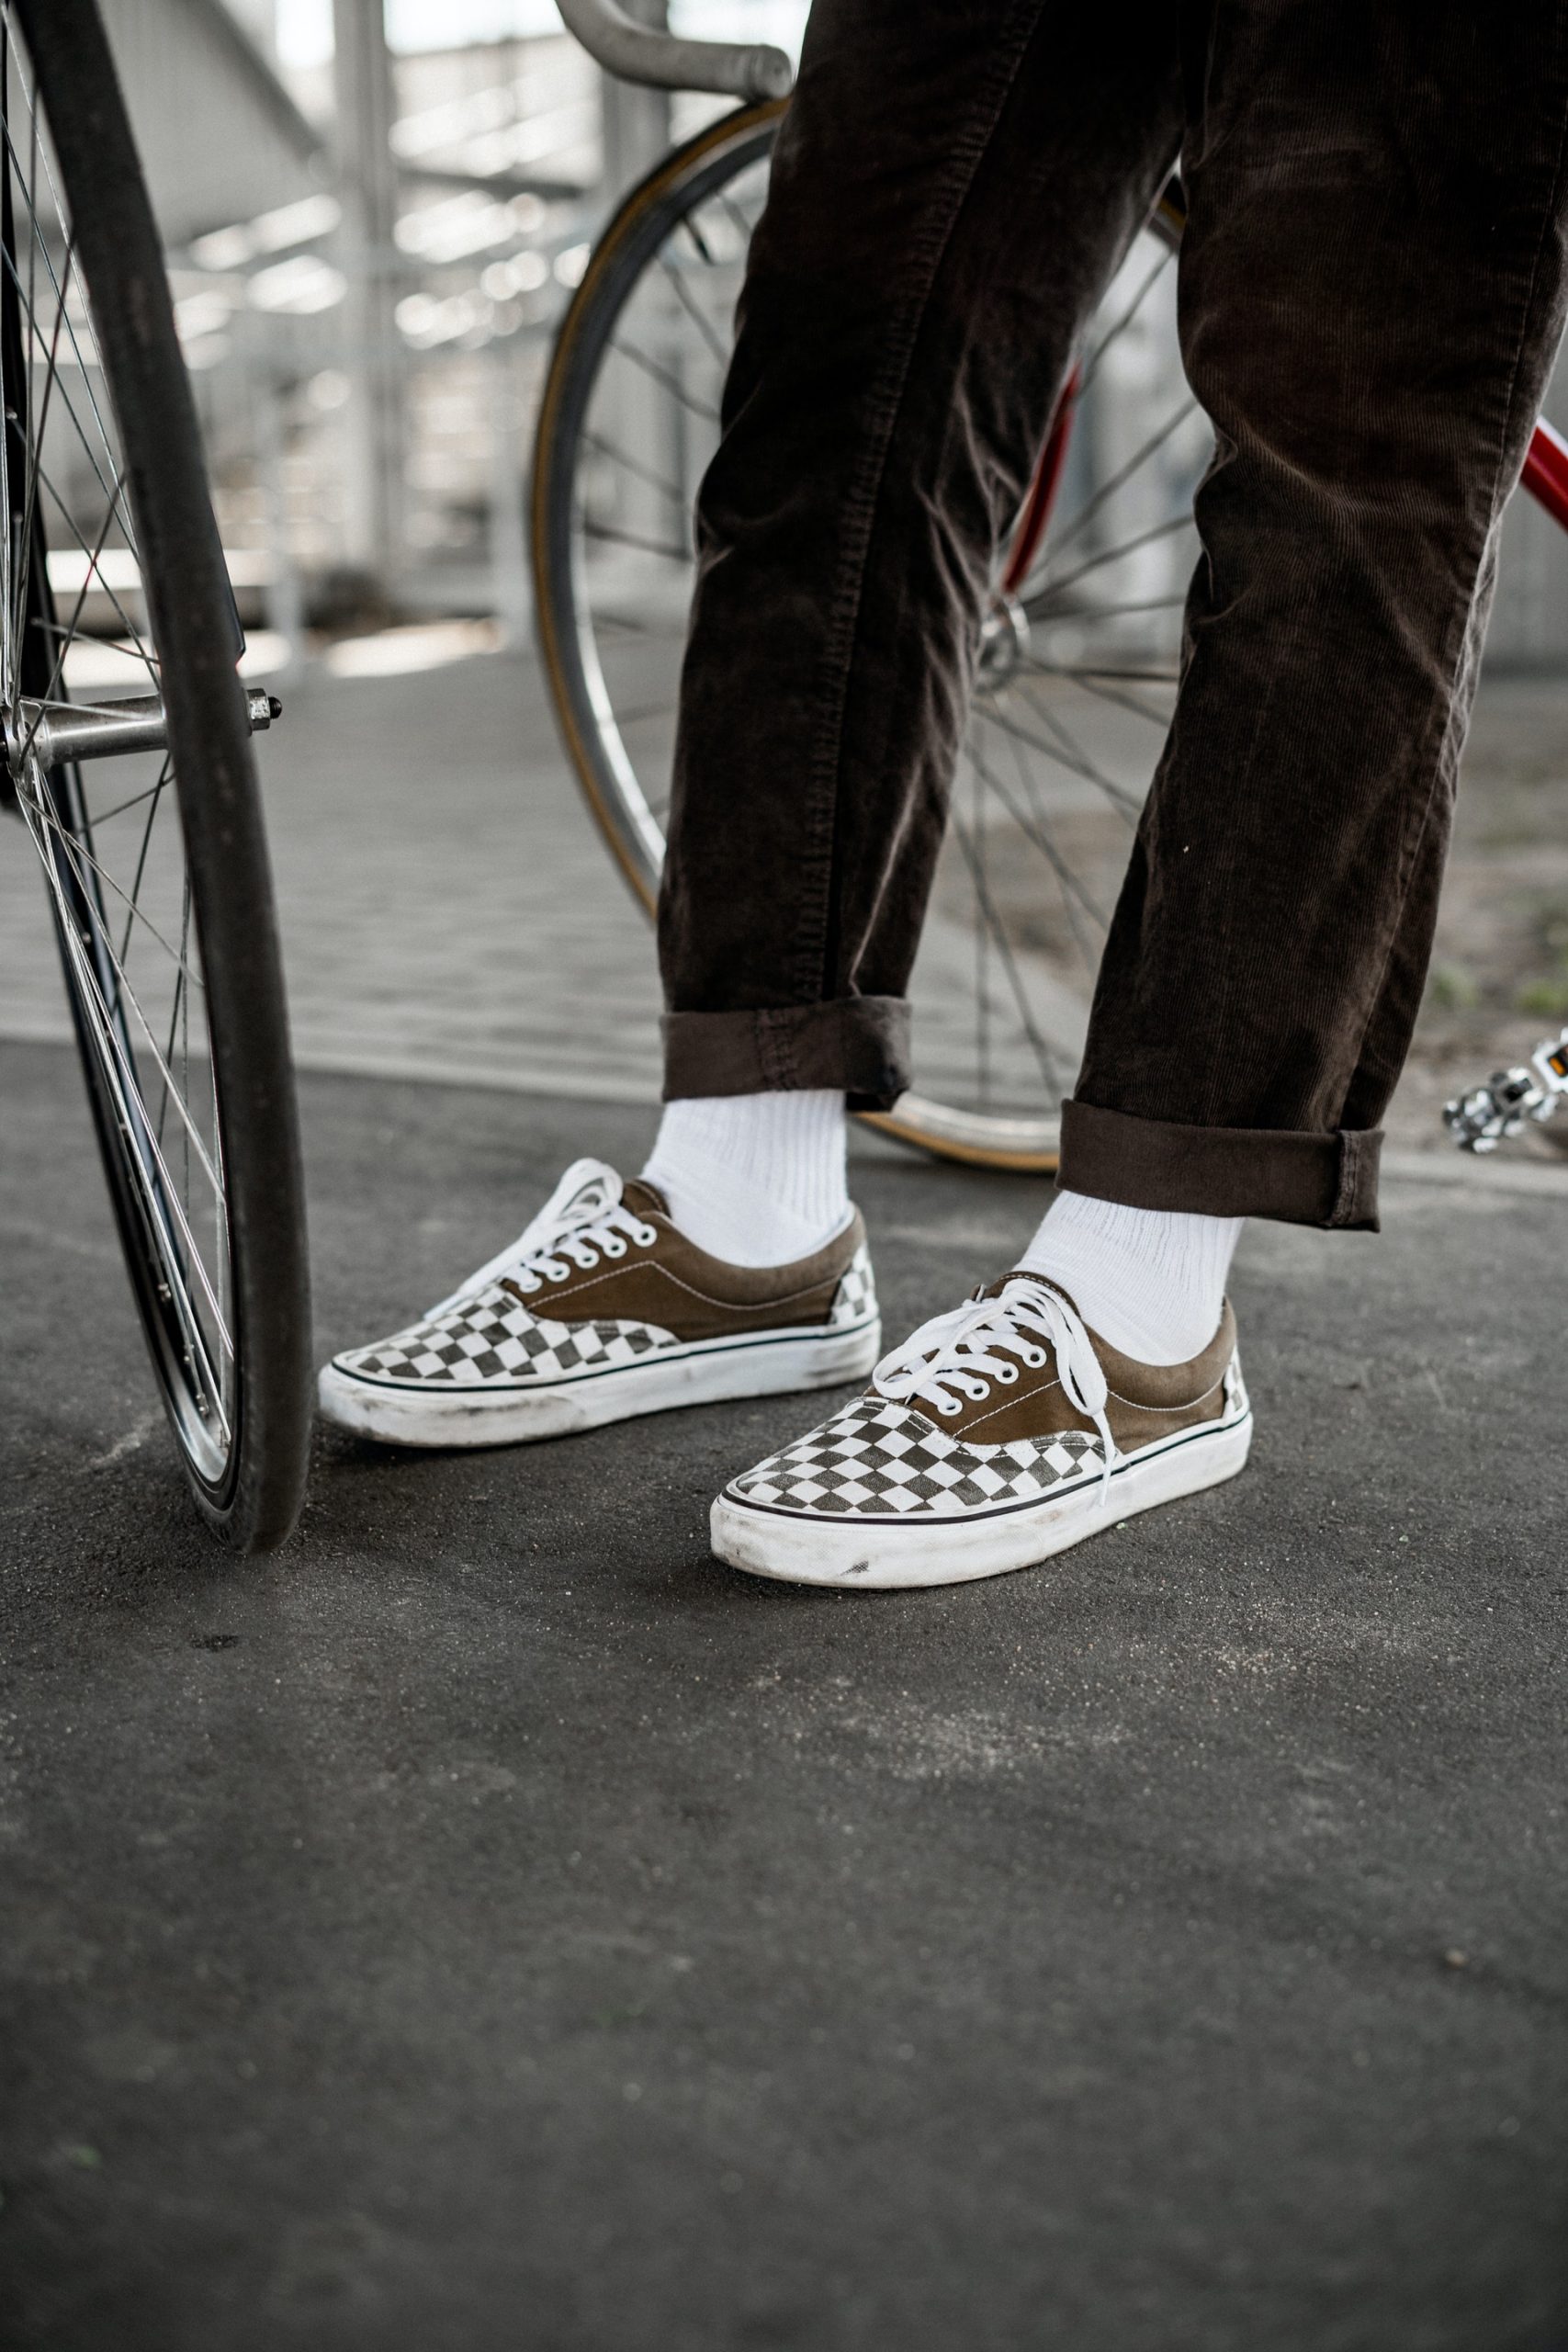 Can Vans Be Used As Biking Shoes?